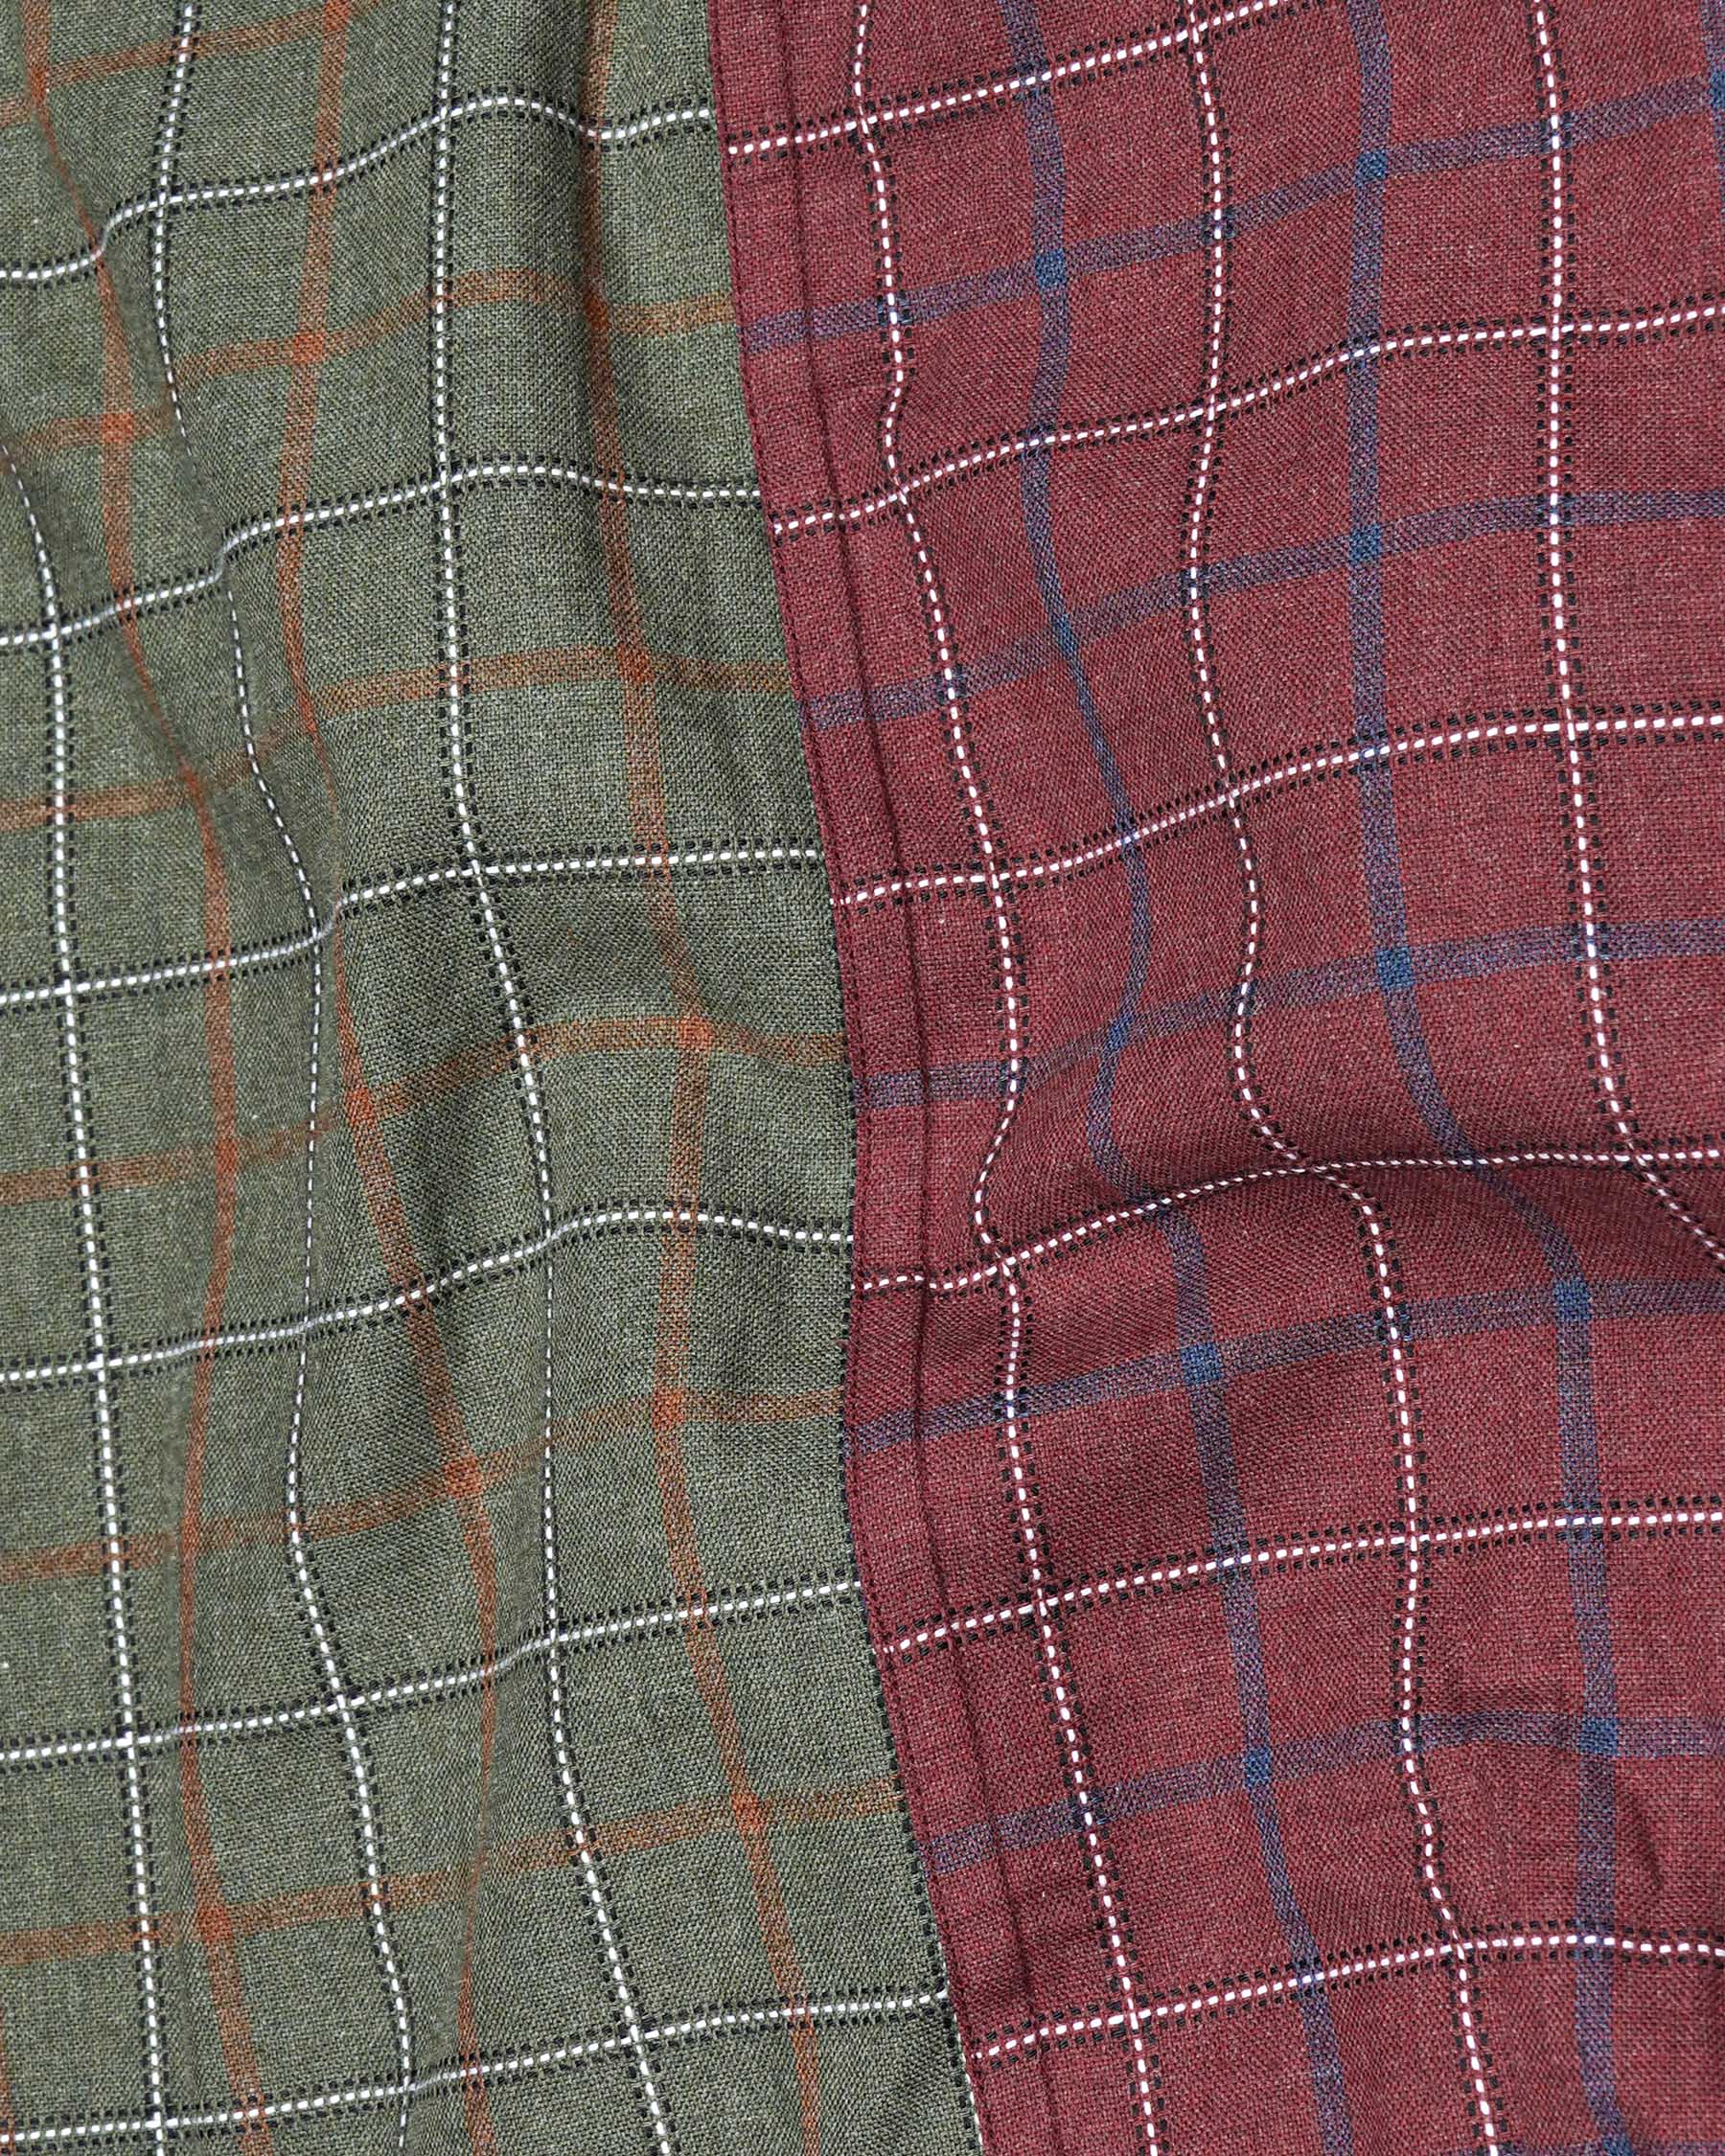 Copper Rust Red and Limed Ash Green Windowpane Dobby Textured Premium Giza Cotton Shirt 7760-BLK-P206-38, 7760-BLK-P206-H-38, 7760-BLK-P206-39,7760-BLK-P206-H-39, 7760-BLK-P206-40, 7760-BLK-P206-H-40, 7760-BLK-P206-42, 7760-BLK-P206-H-42, 7760-BLK-P206-44, 7760-BLK-P206-H-44, 7760-BLK-P206-46, 7760-BLK-P206-H-46, 7760-BLK-P206-48, 7760-BLK-P206-H-48, 7760-BLK-P206-50, 7760-BLK-P206-H-50, 7760-BLK-P206-52, 7760-BLK-P206-H-52